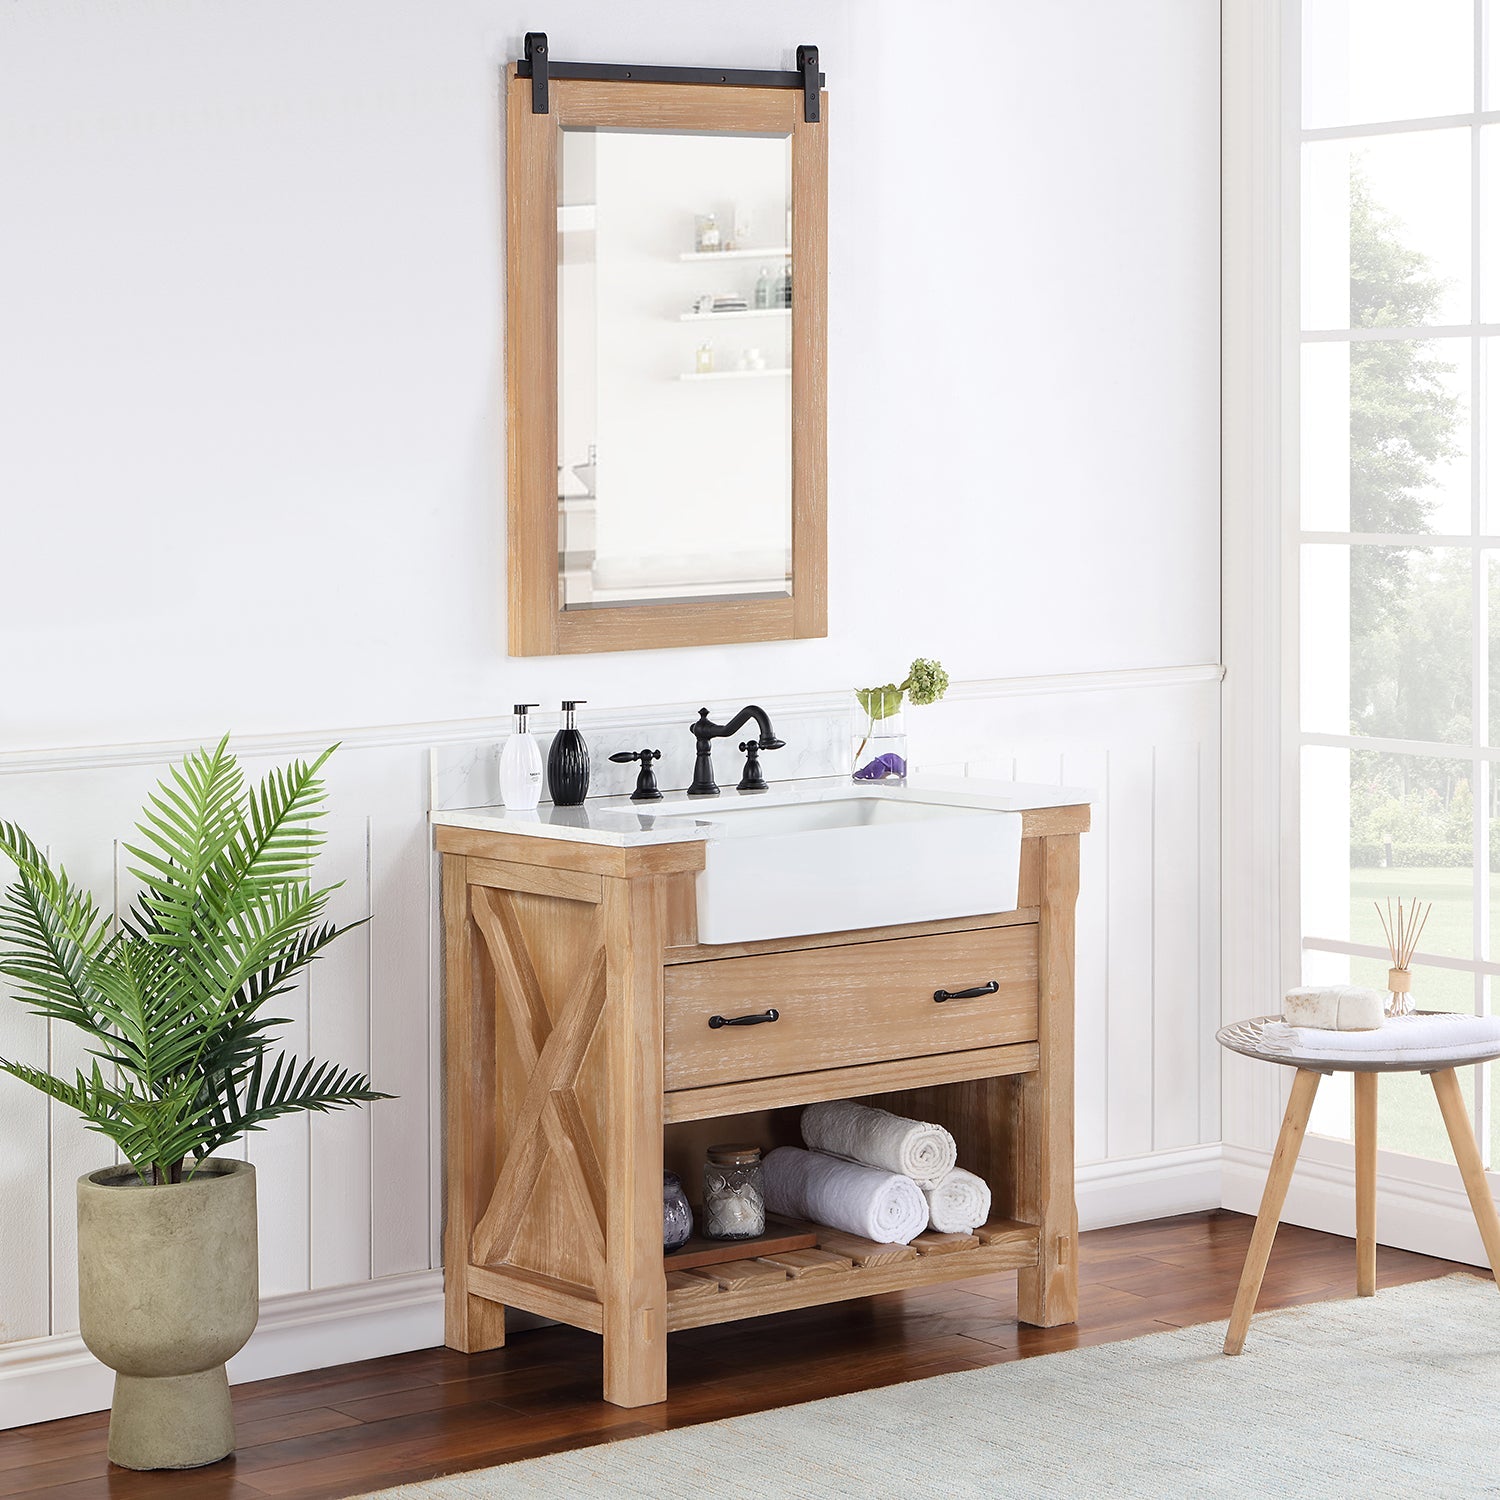 Vinnova Design Villareal 36" Single Vanity in Weathered Pine with Composite Stone Top in White, White Farmhouse Basin - New Star Living